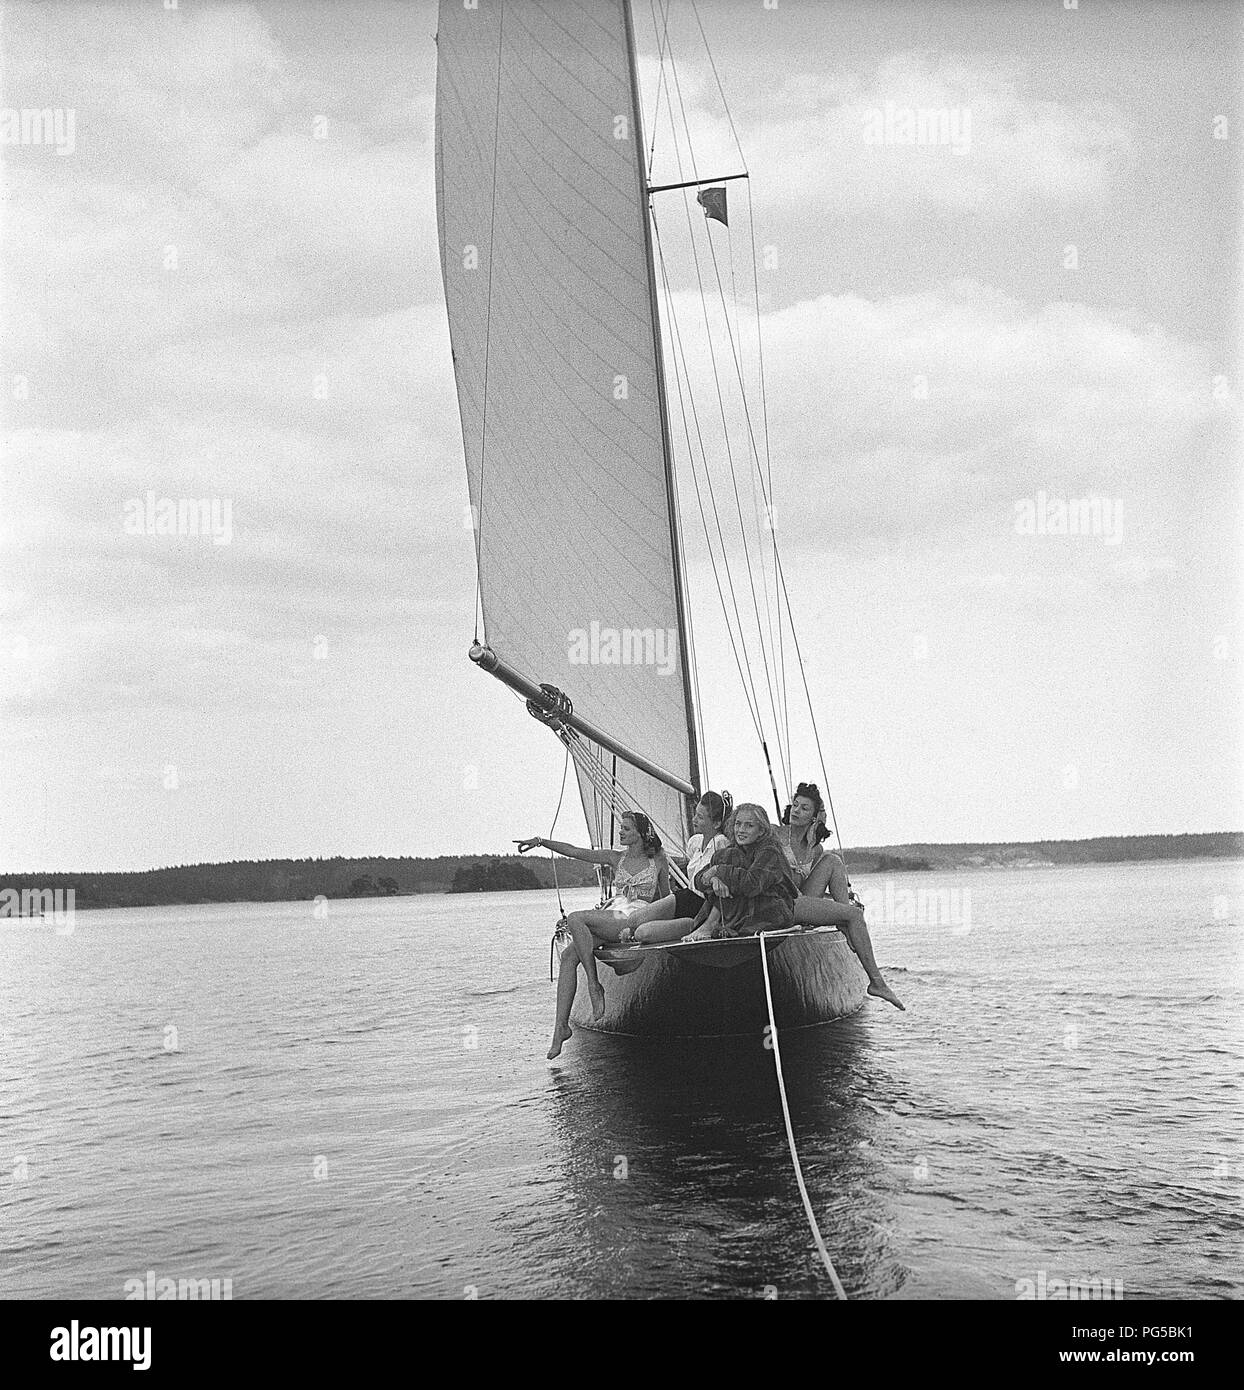 1940s boating. Four young women are on board a fashionable sailing boat ...